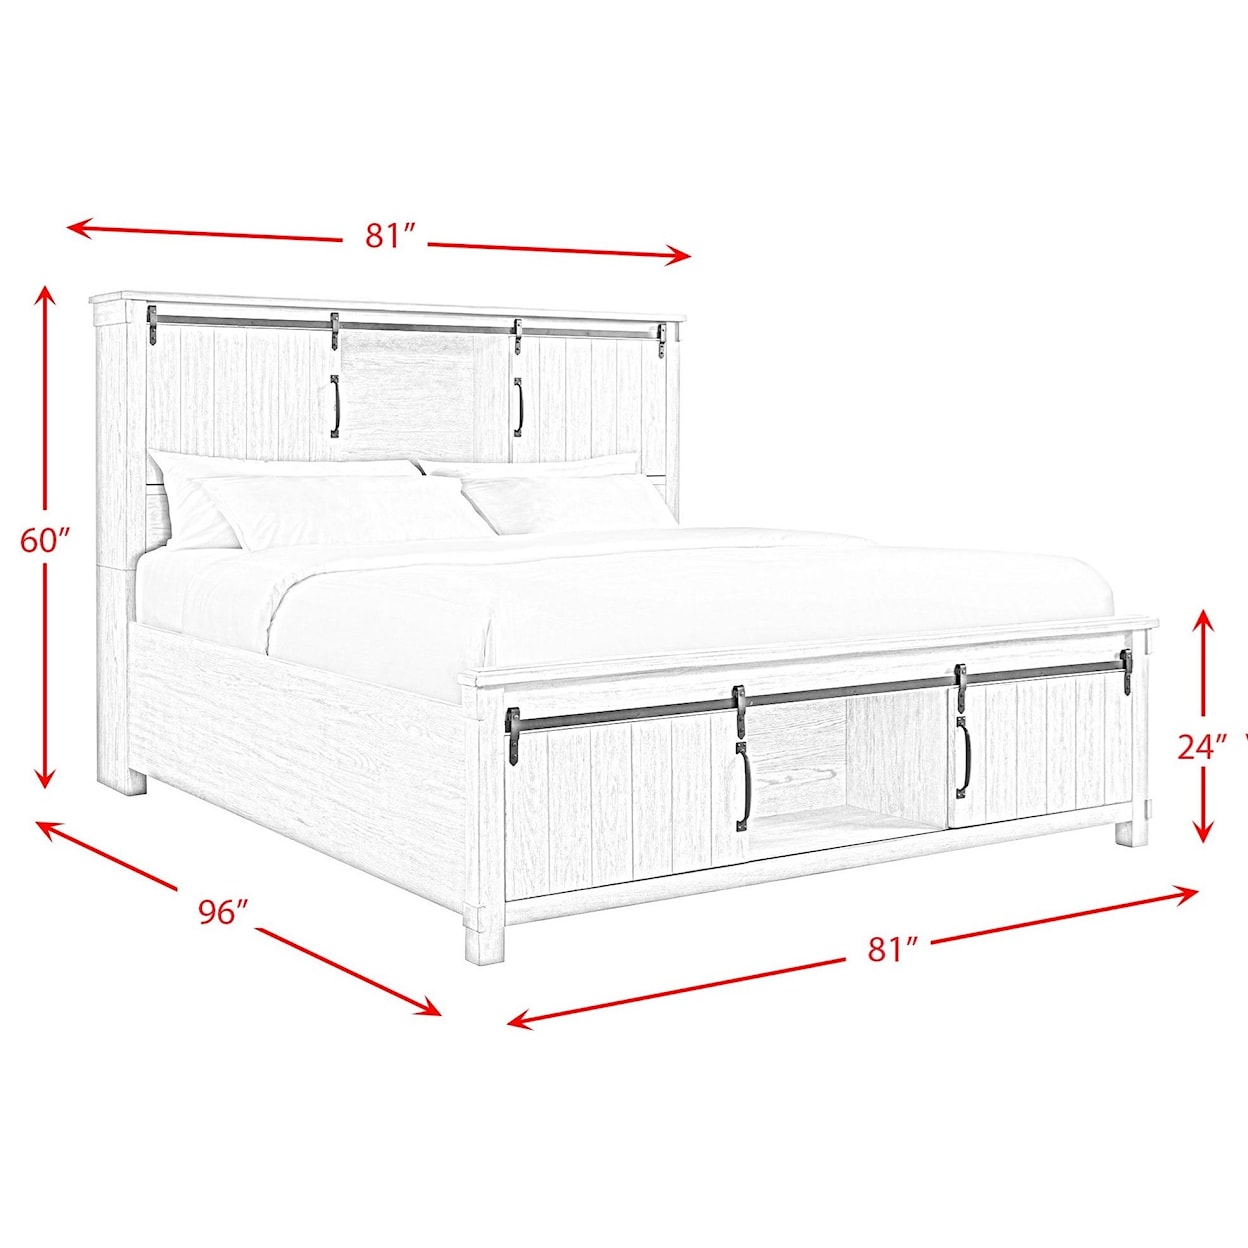 ELE Malone King Bed with Storage